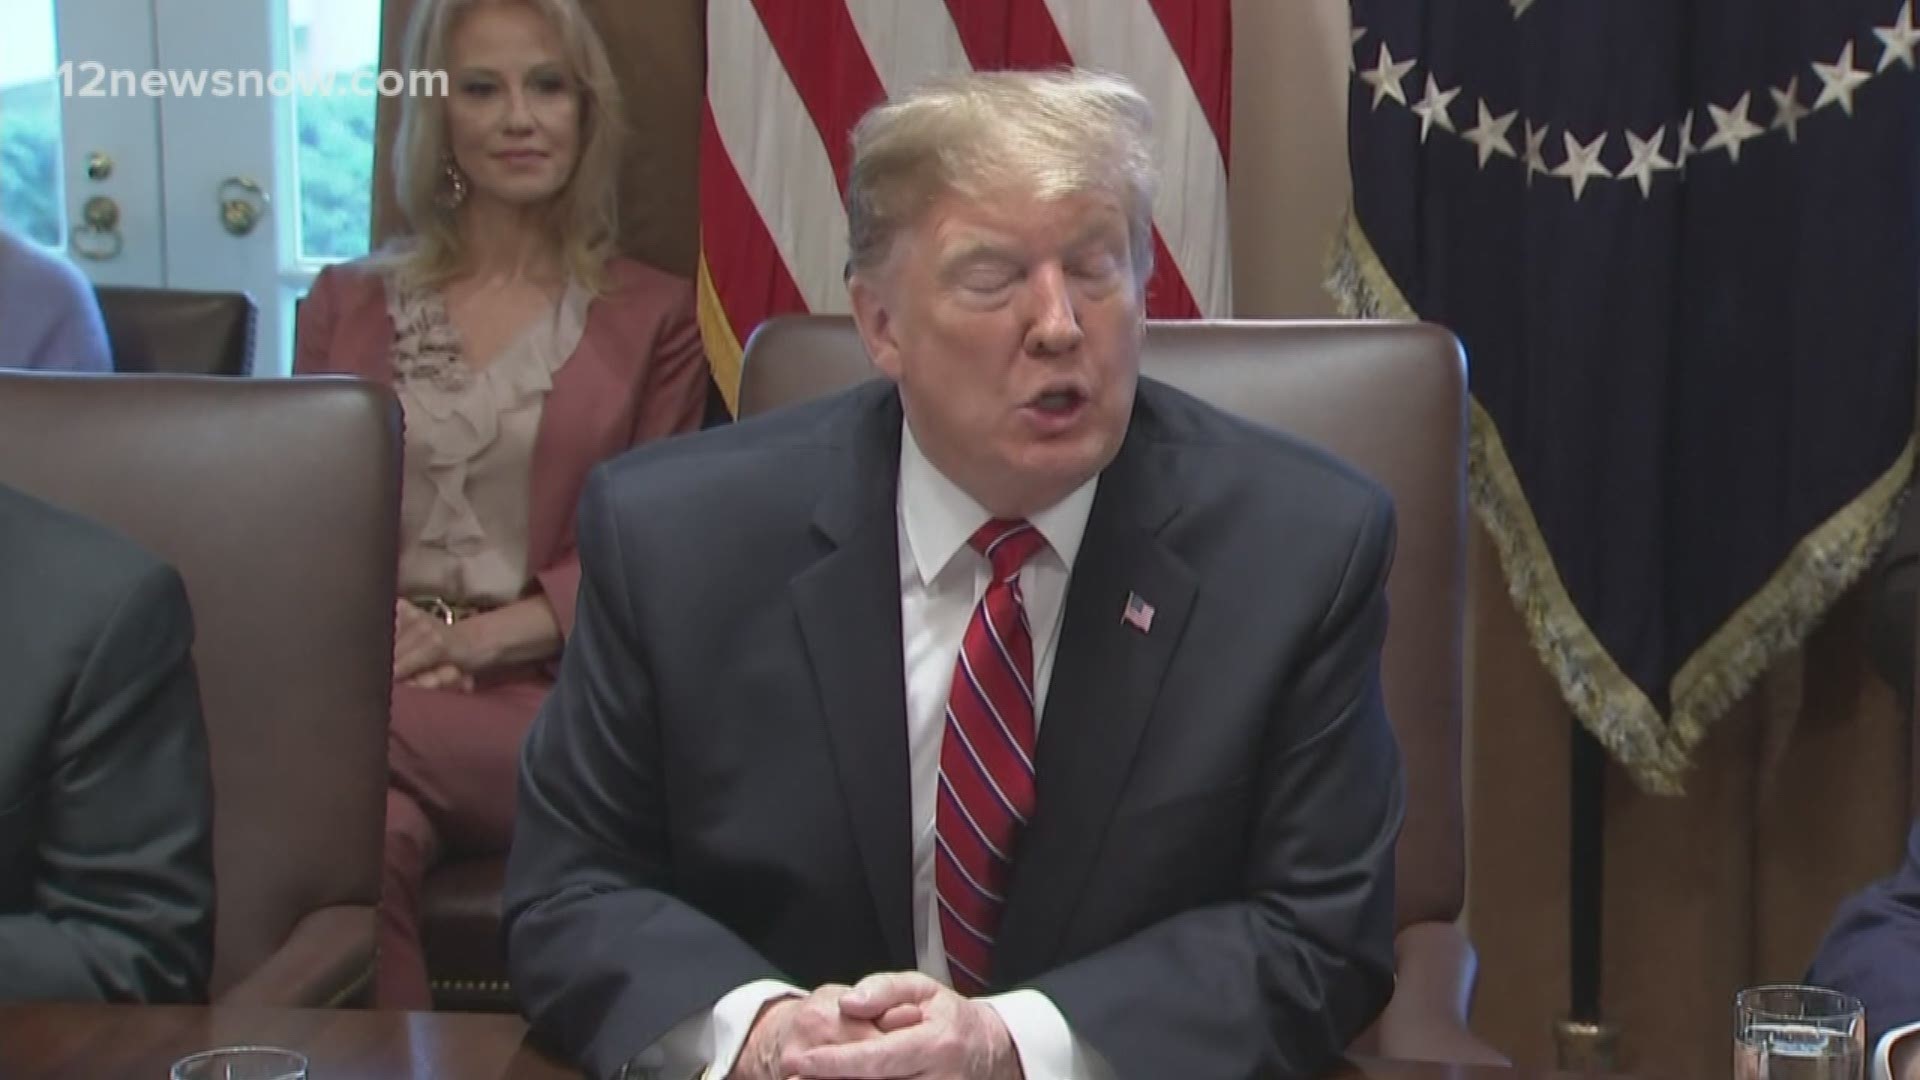 President Trump does not like how much the compromise takes away from what he wants in the border wall deal, causing many to believe he won't sign-off on the deal, even with people from both sides urging him to settle.